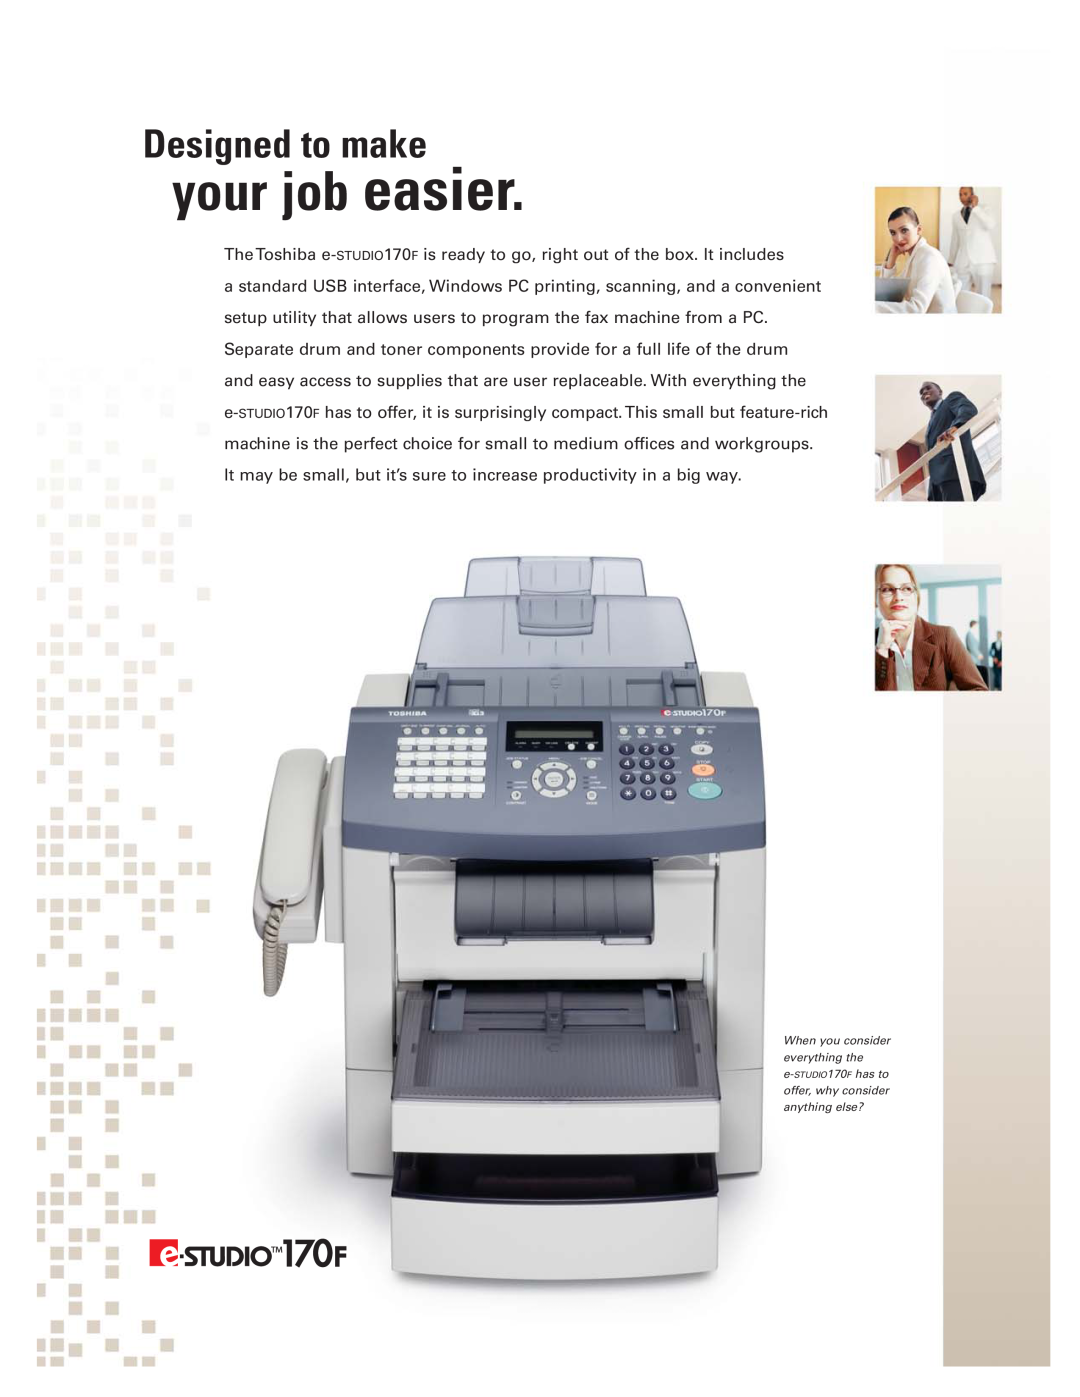 Toshiba Workgroup17 manual Designed to make, your job easier 